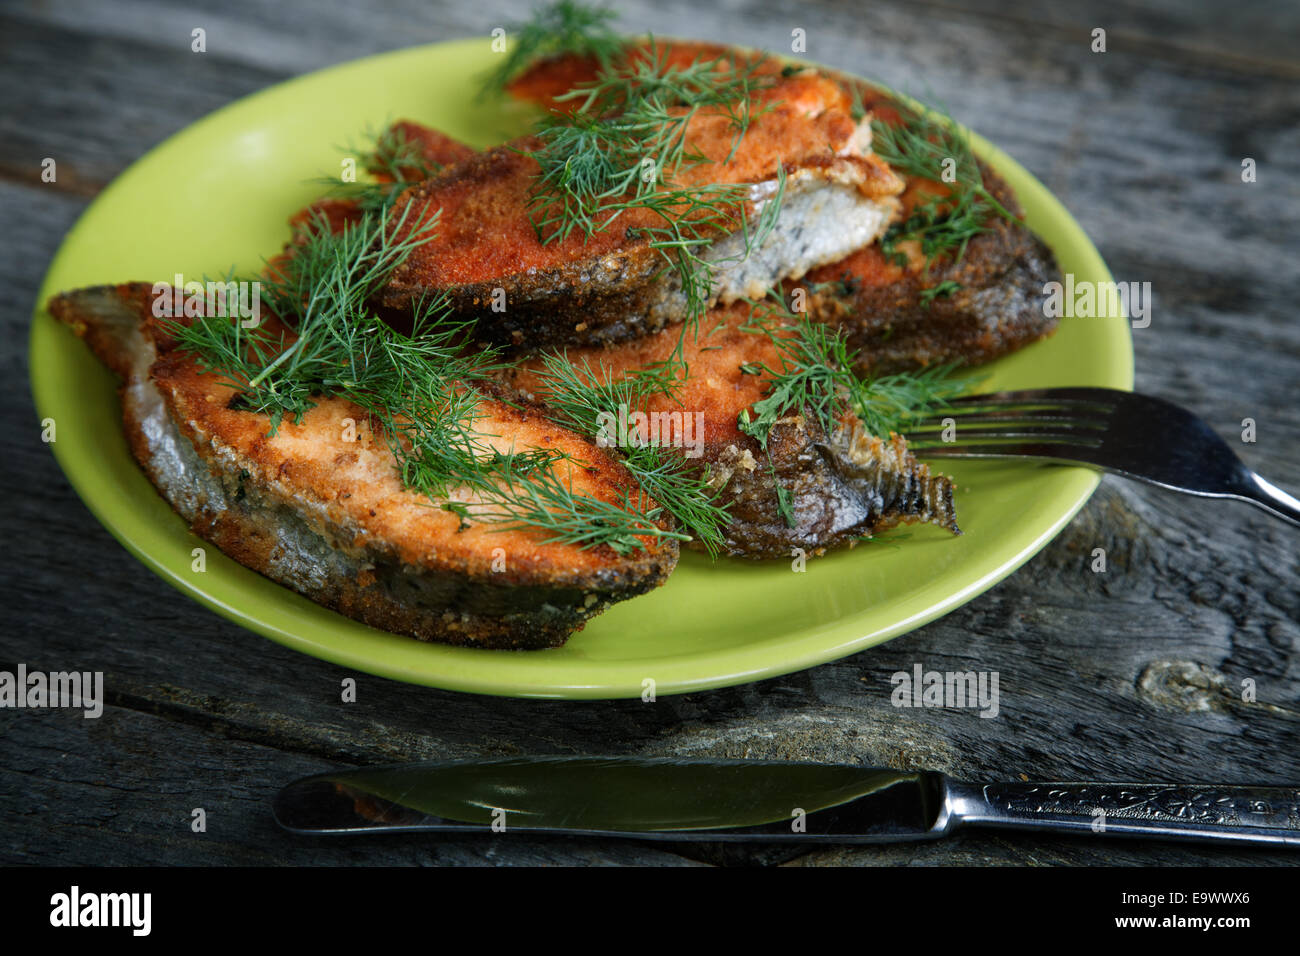 Plate with fried fish on a wooden table Stock Photo